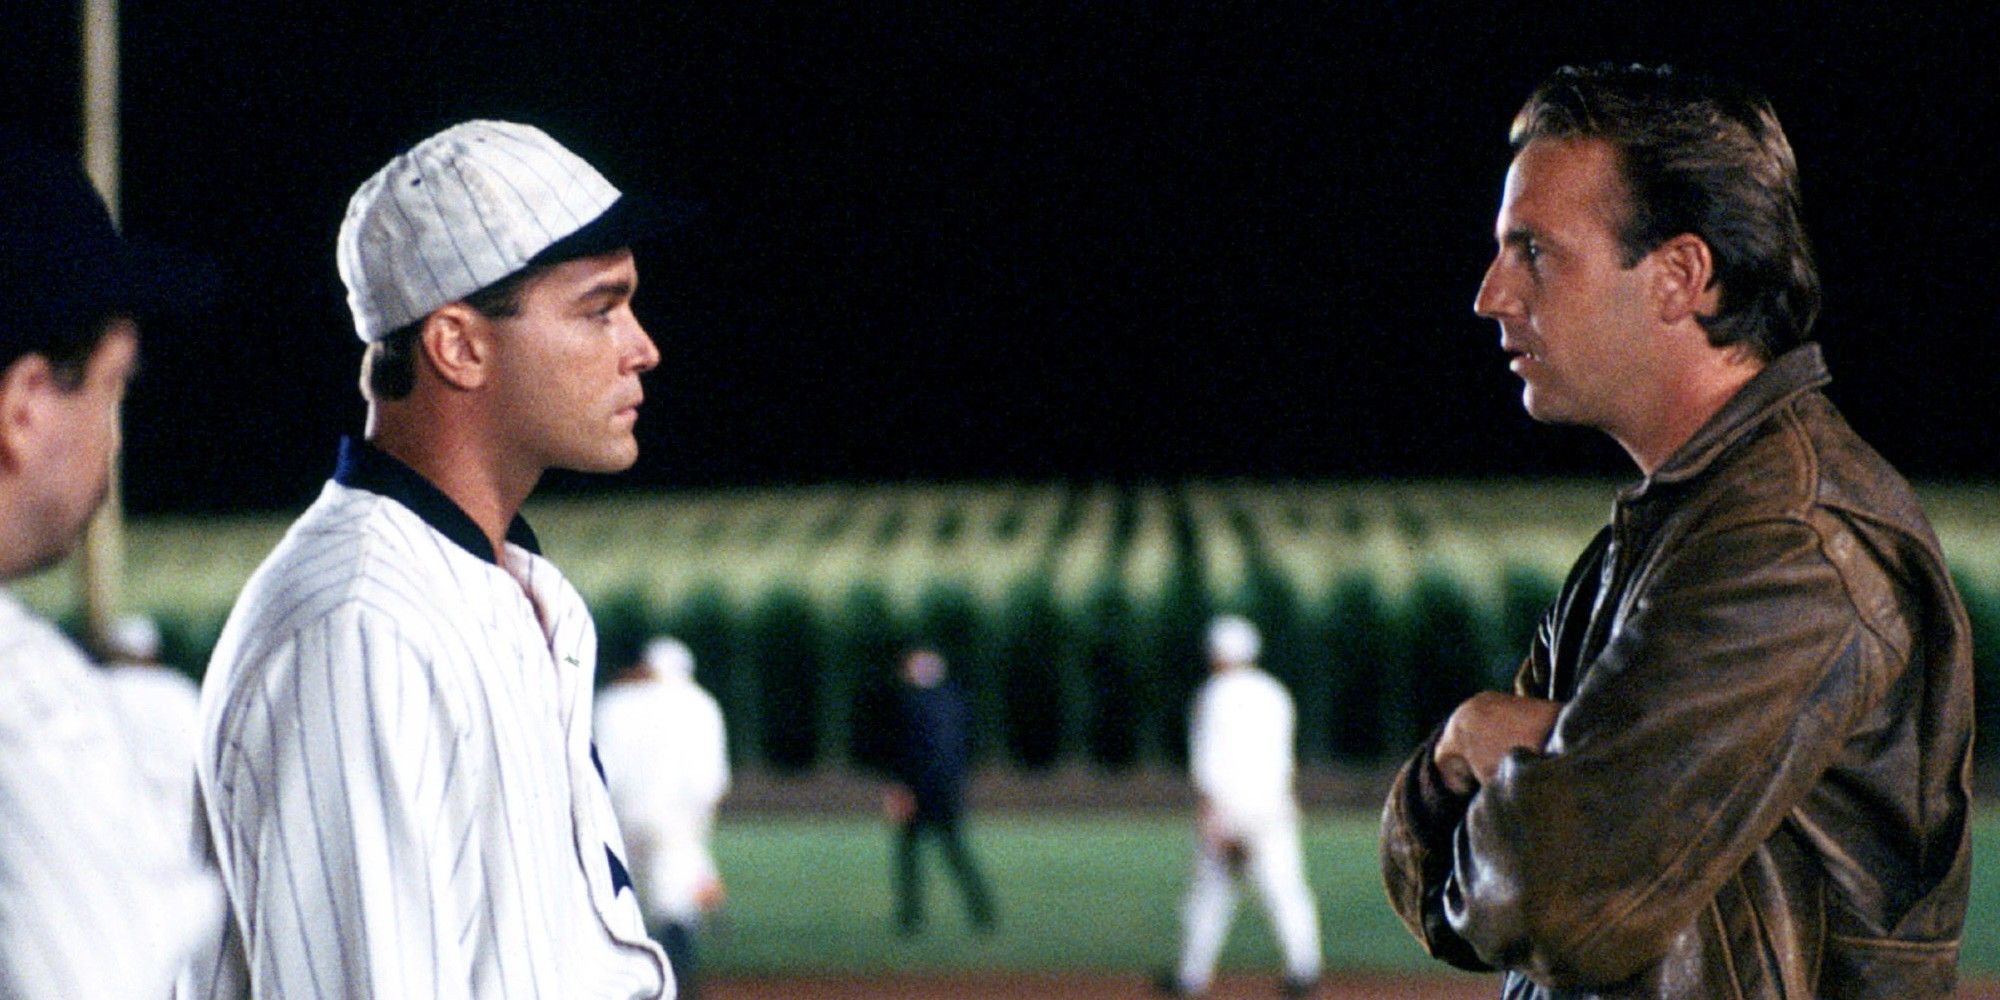 Ray and Shoeless Joe face each other in Field of Dream